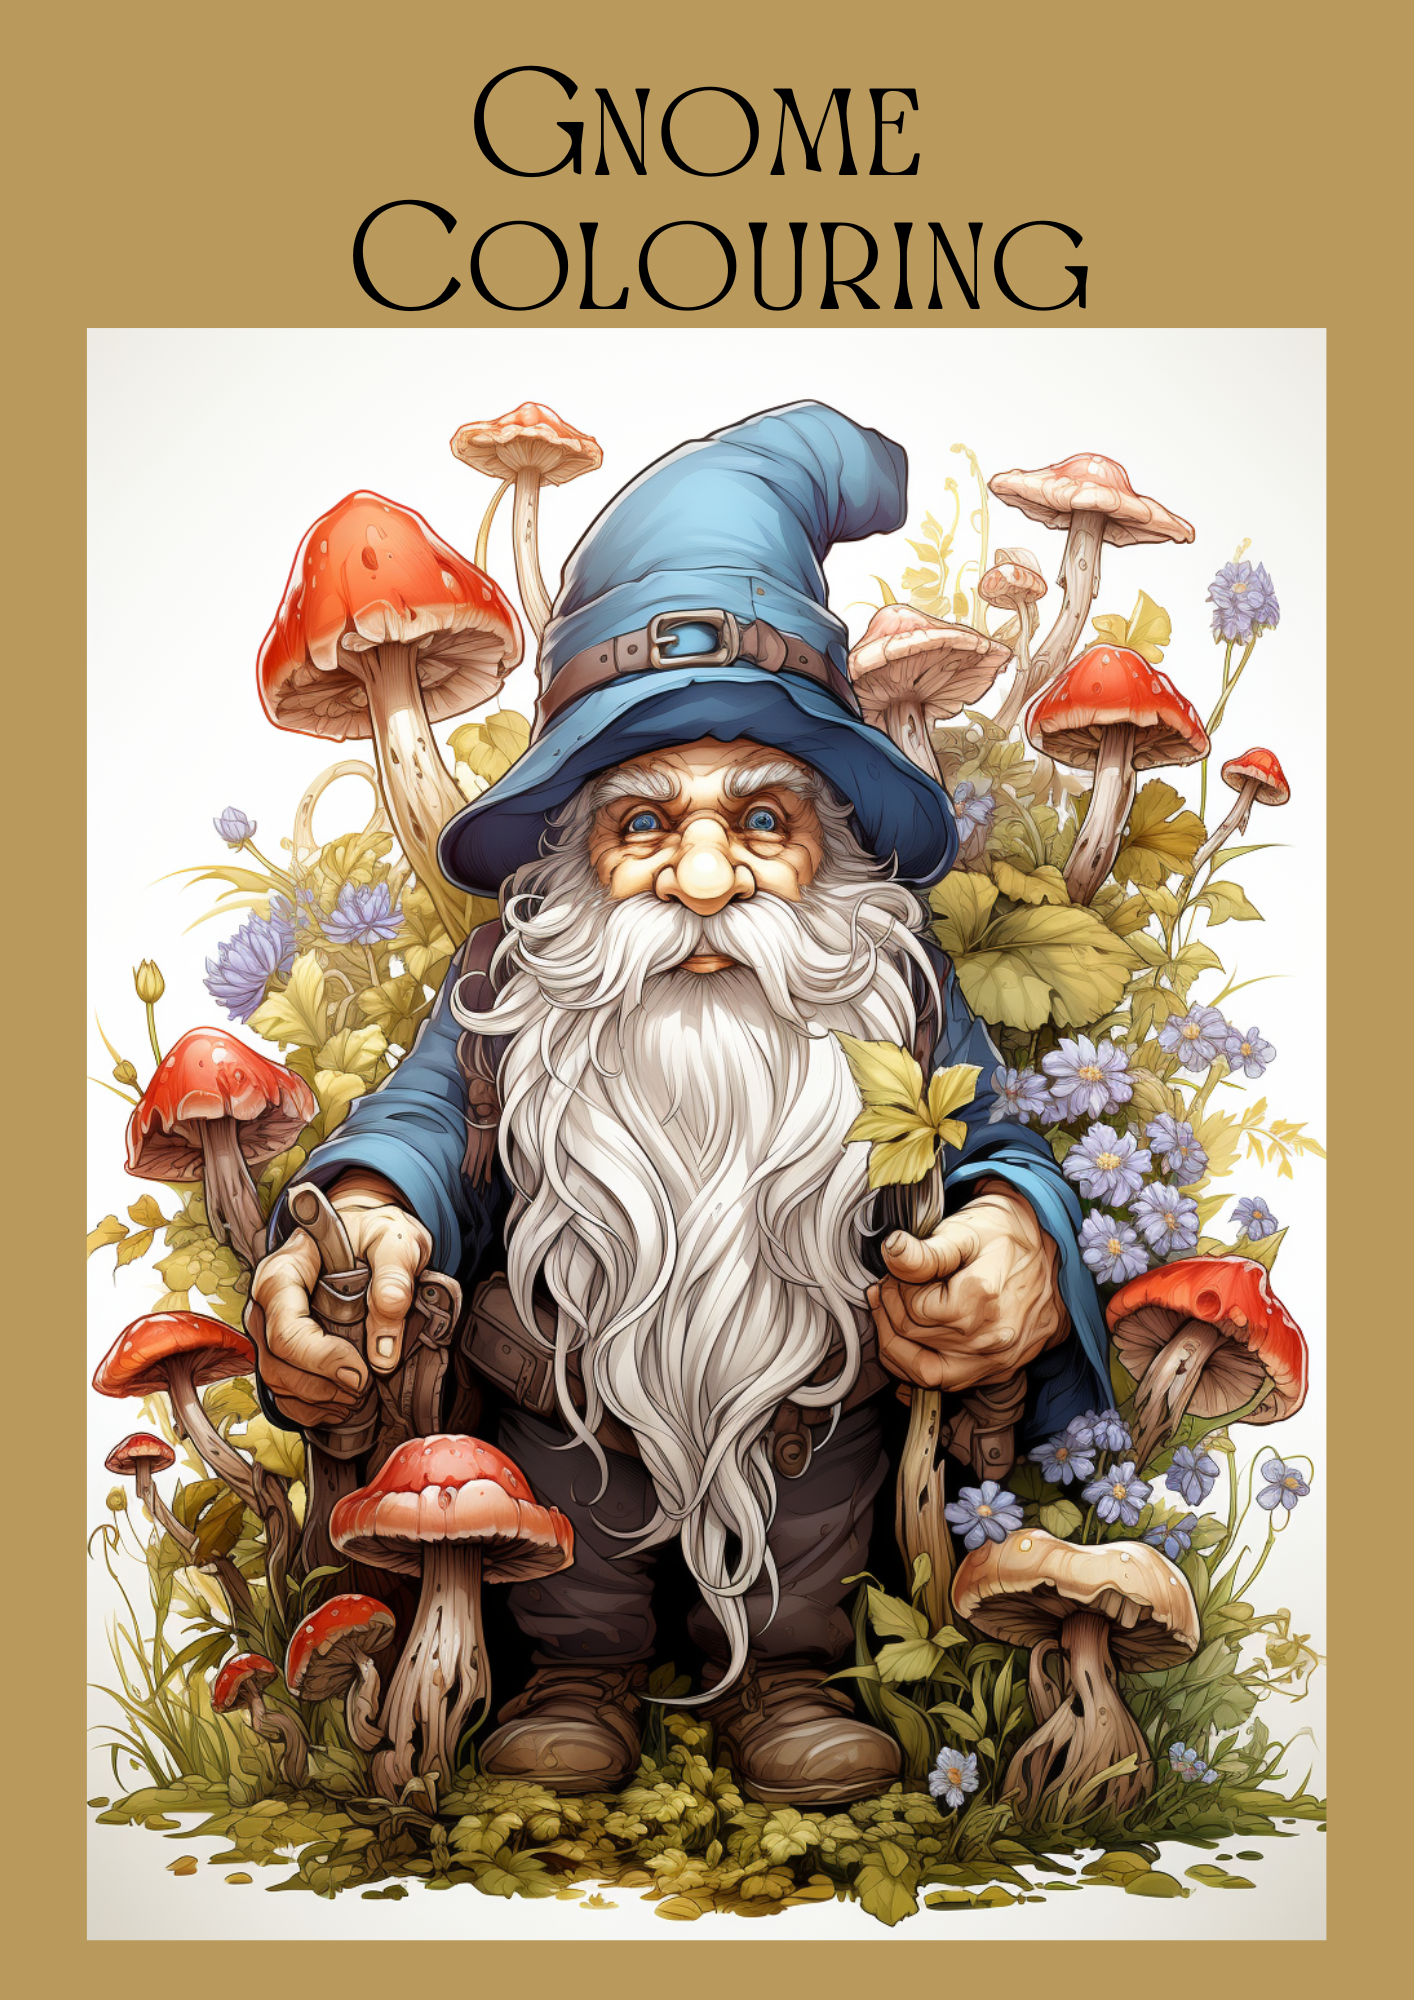 Gnome colouring.png